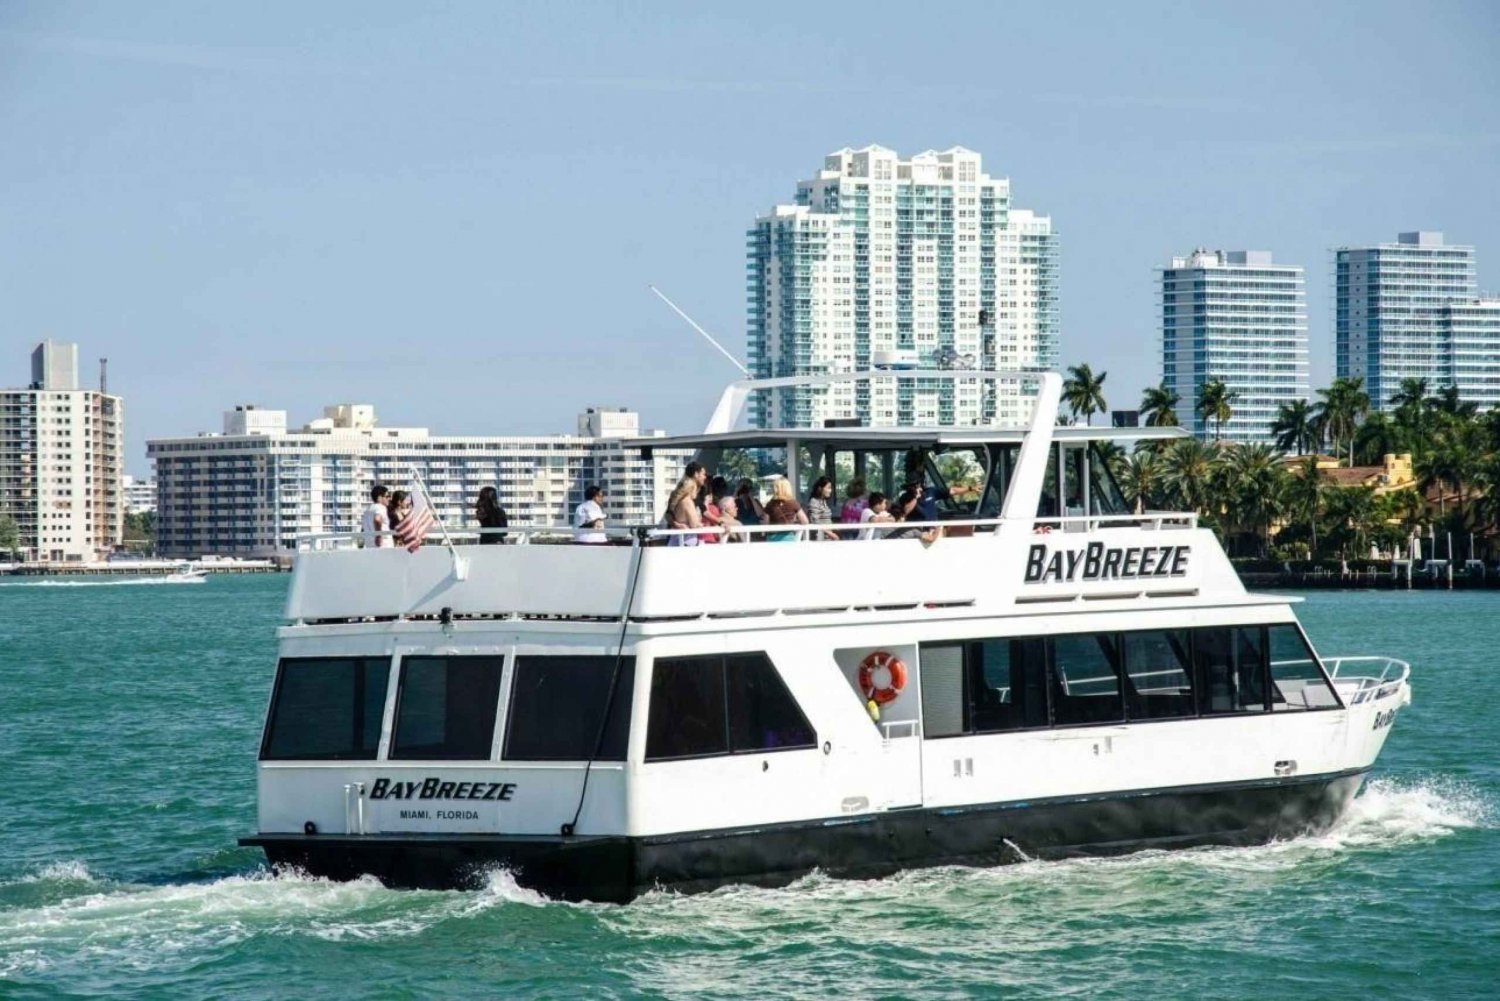 Miami: Biscayne Bay Celebrity Homes Sightseeing Cruise: Biscayne Bay Celebrity Homes Sightseeing Cruise